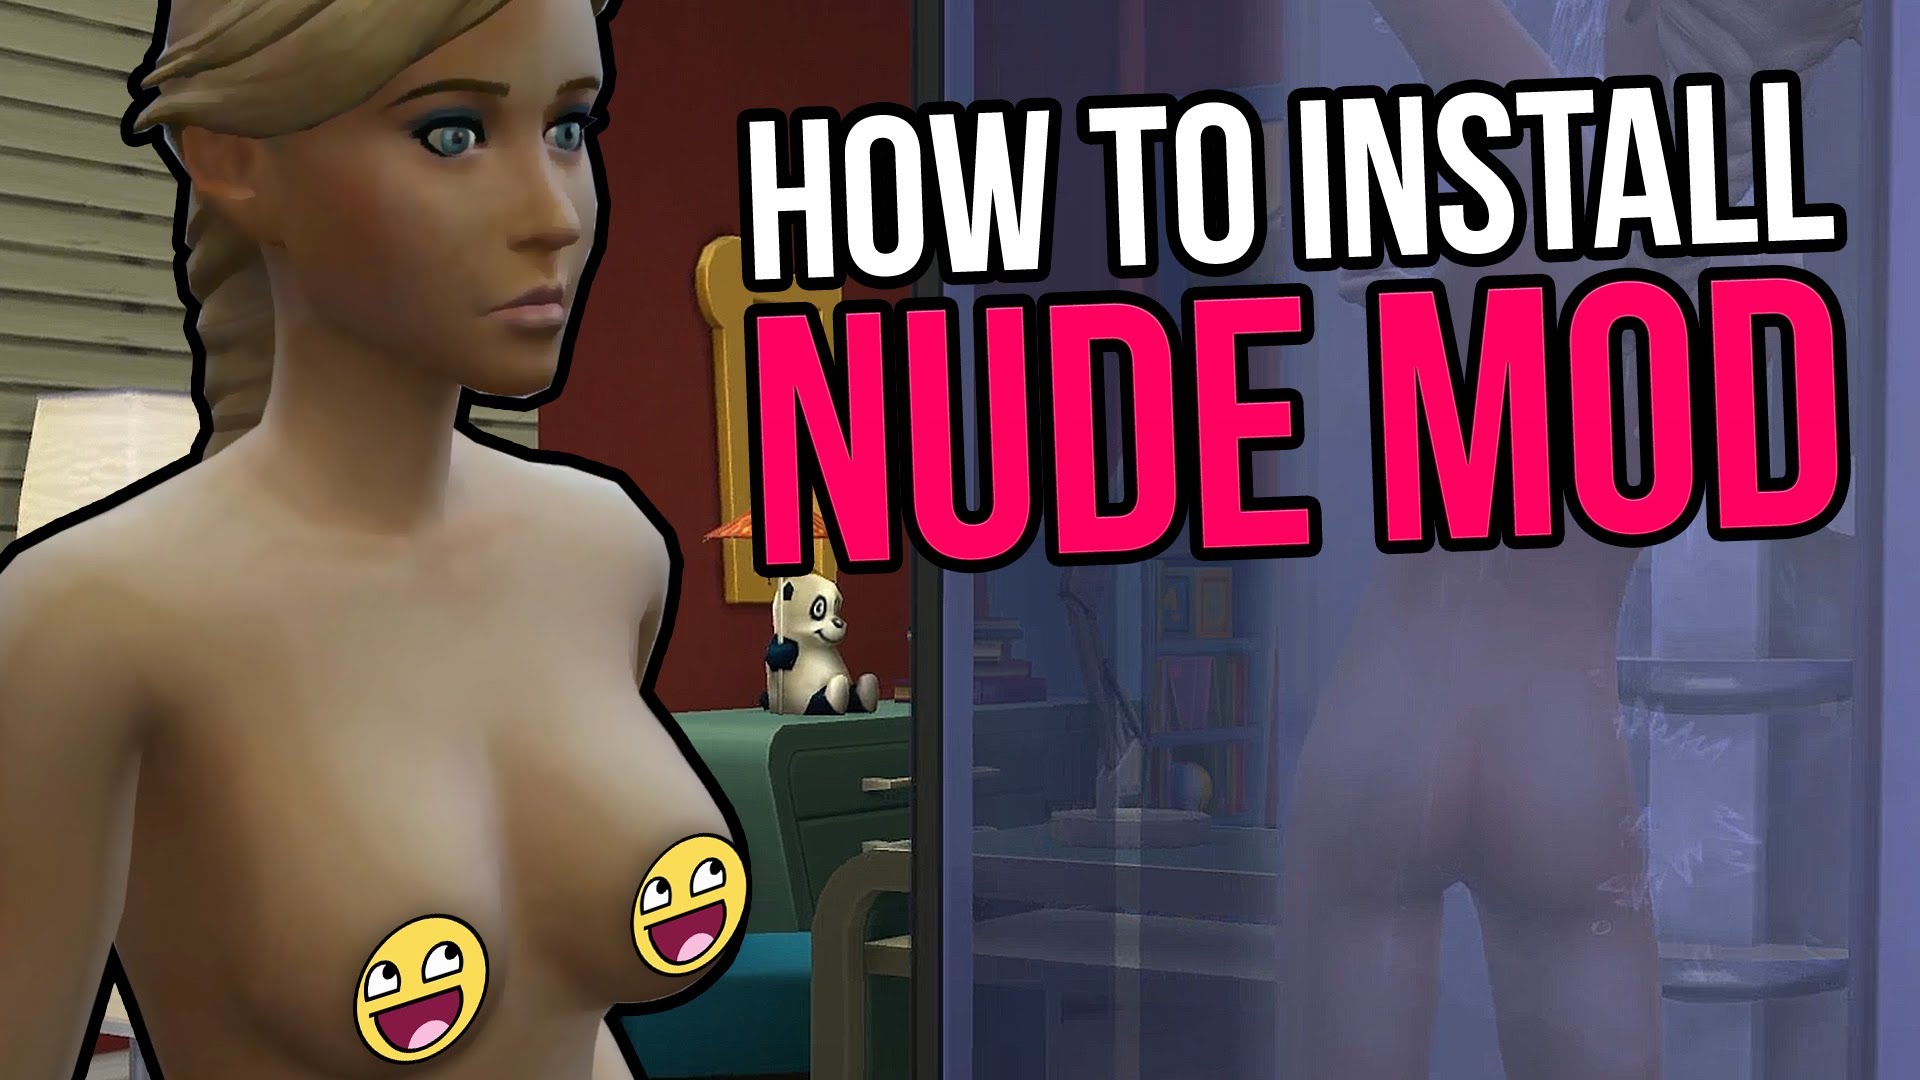 The Sims 4 Nude Patch